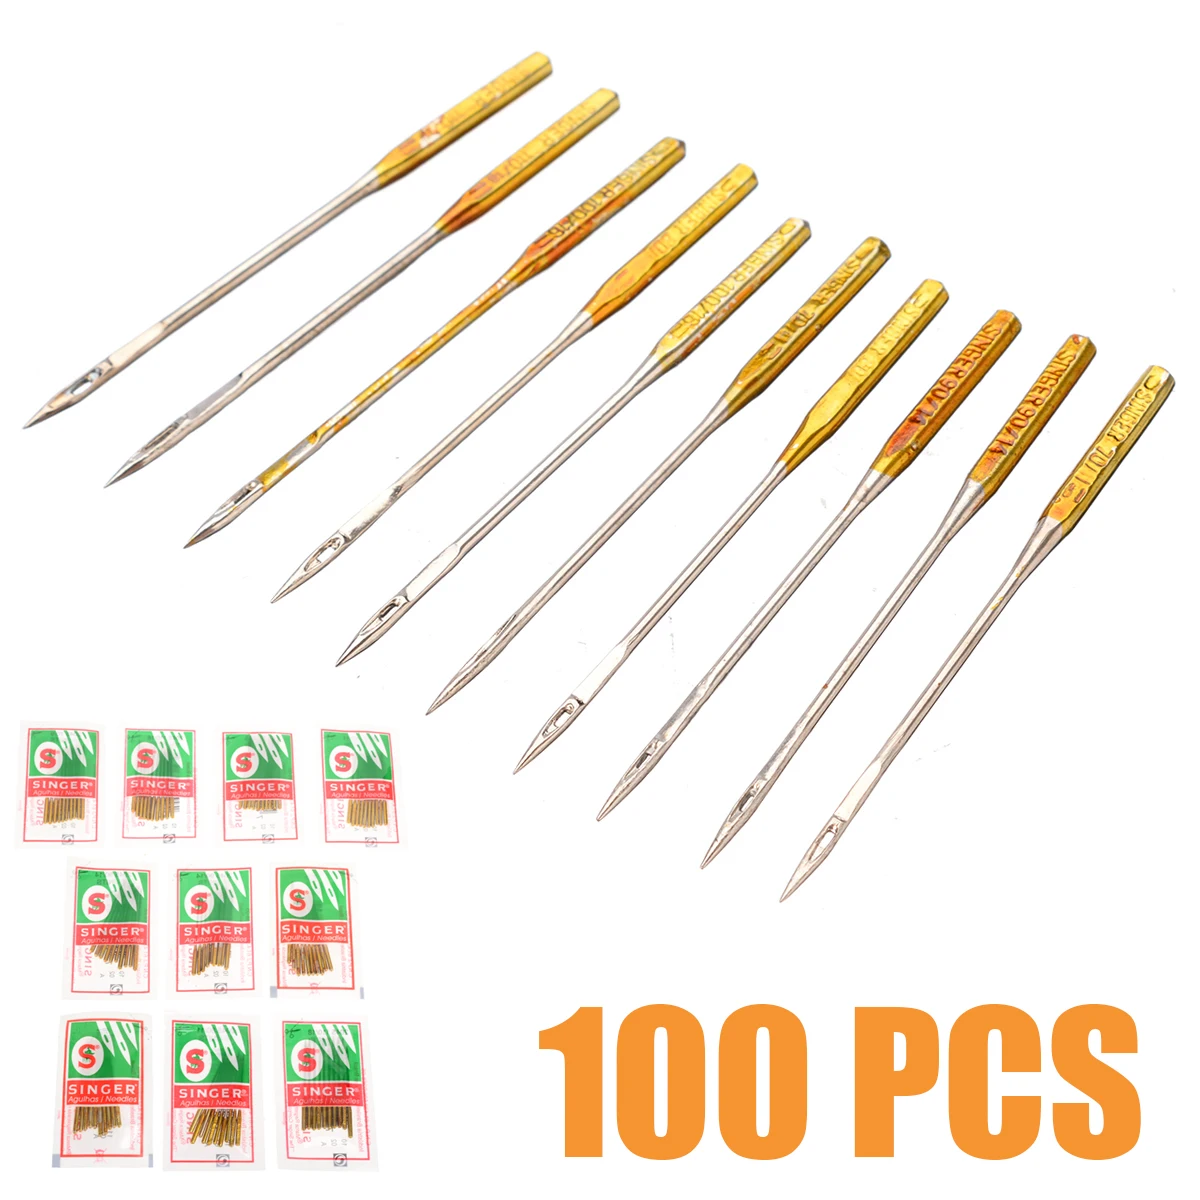 

100pcs/Lot 9/11/14/16/18 Domestic Sewing Machine Needles Home DIY Sew Needle Tool For Singer 2020 HAX1 705H